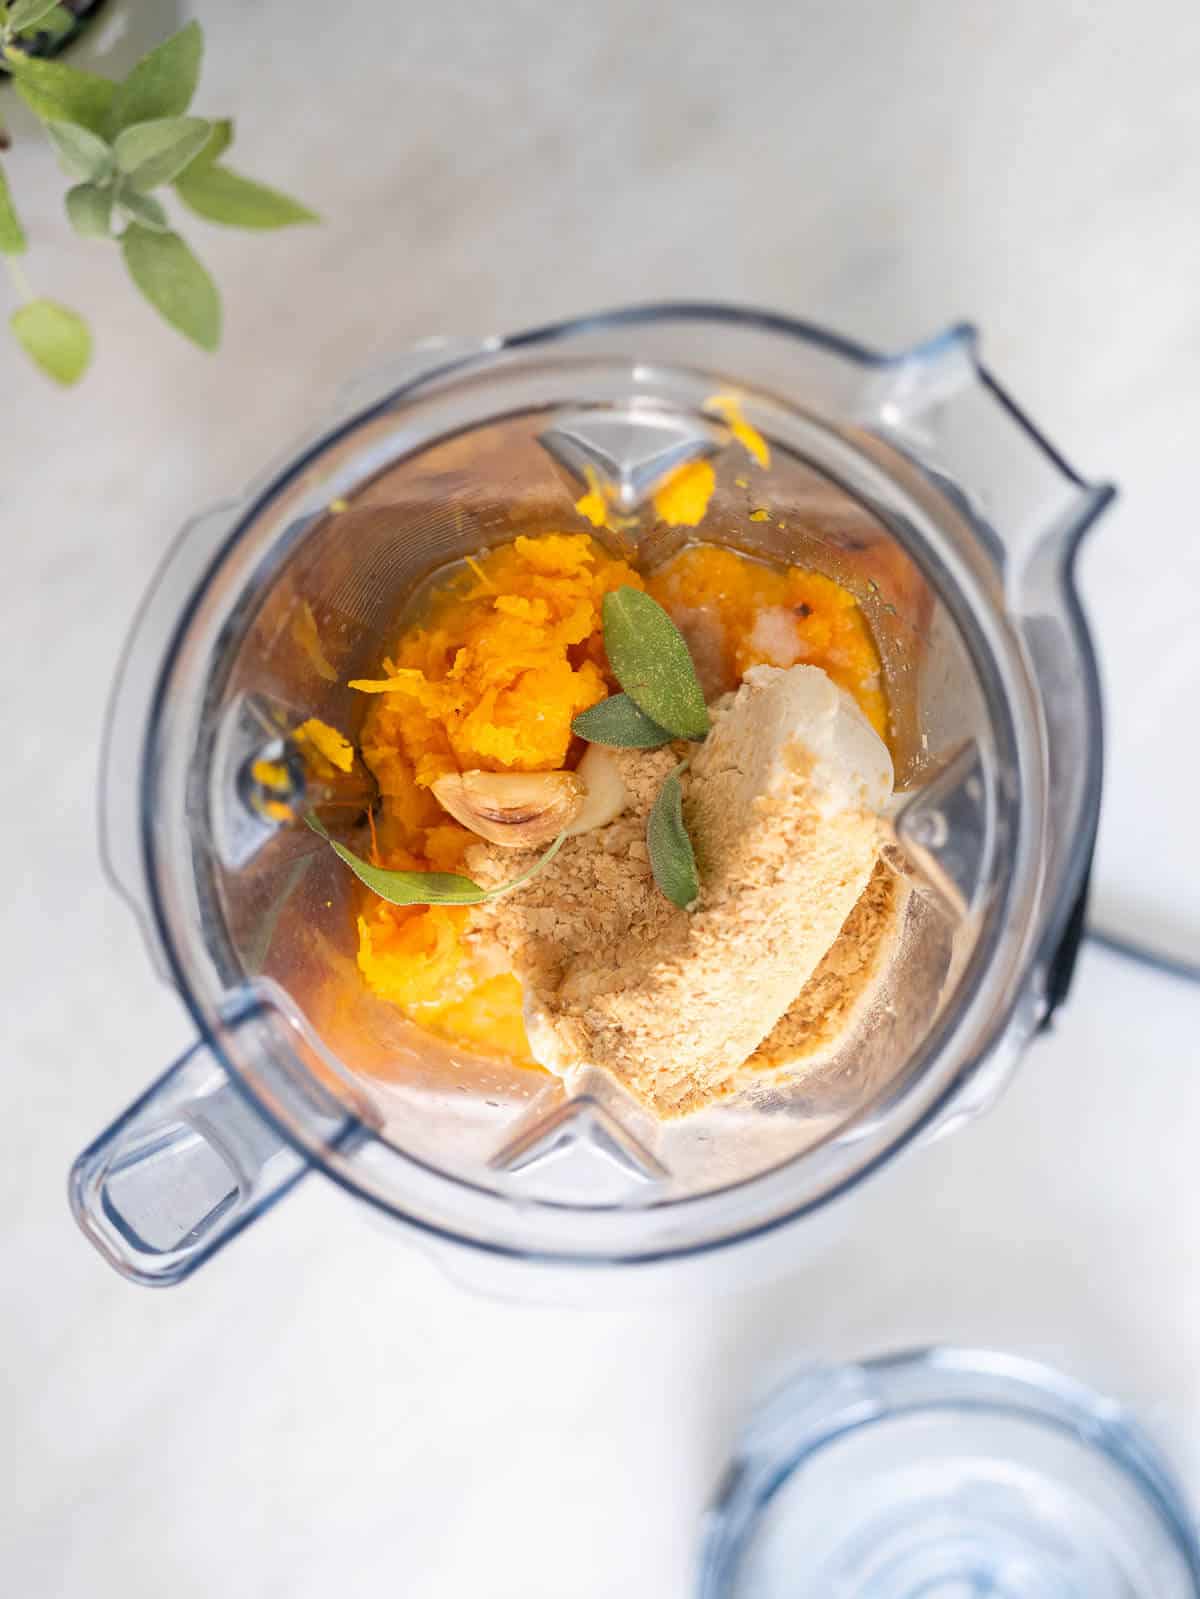 add all the butternut squash ingredients to a blender.